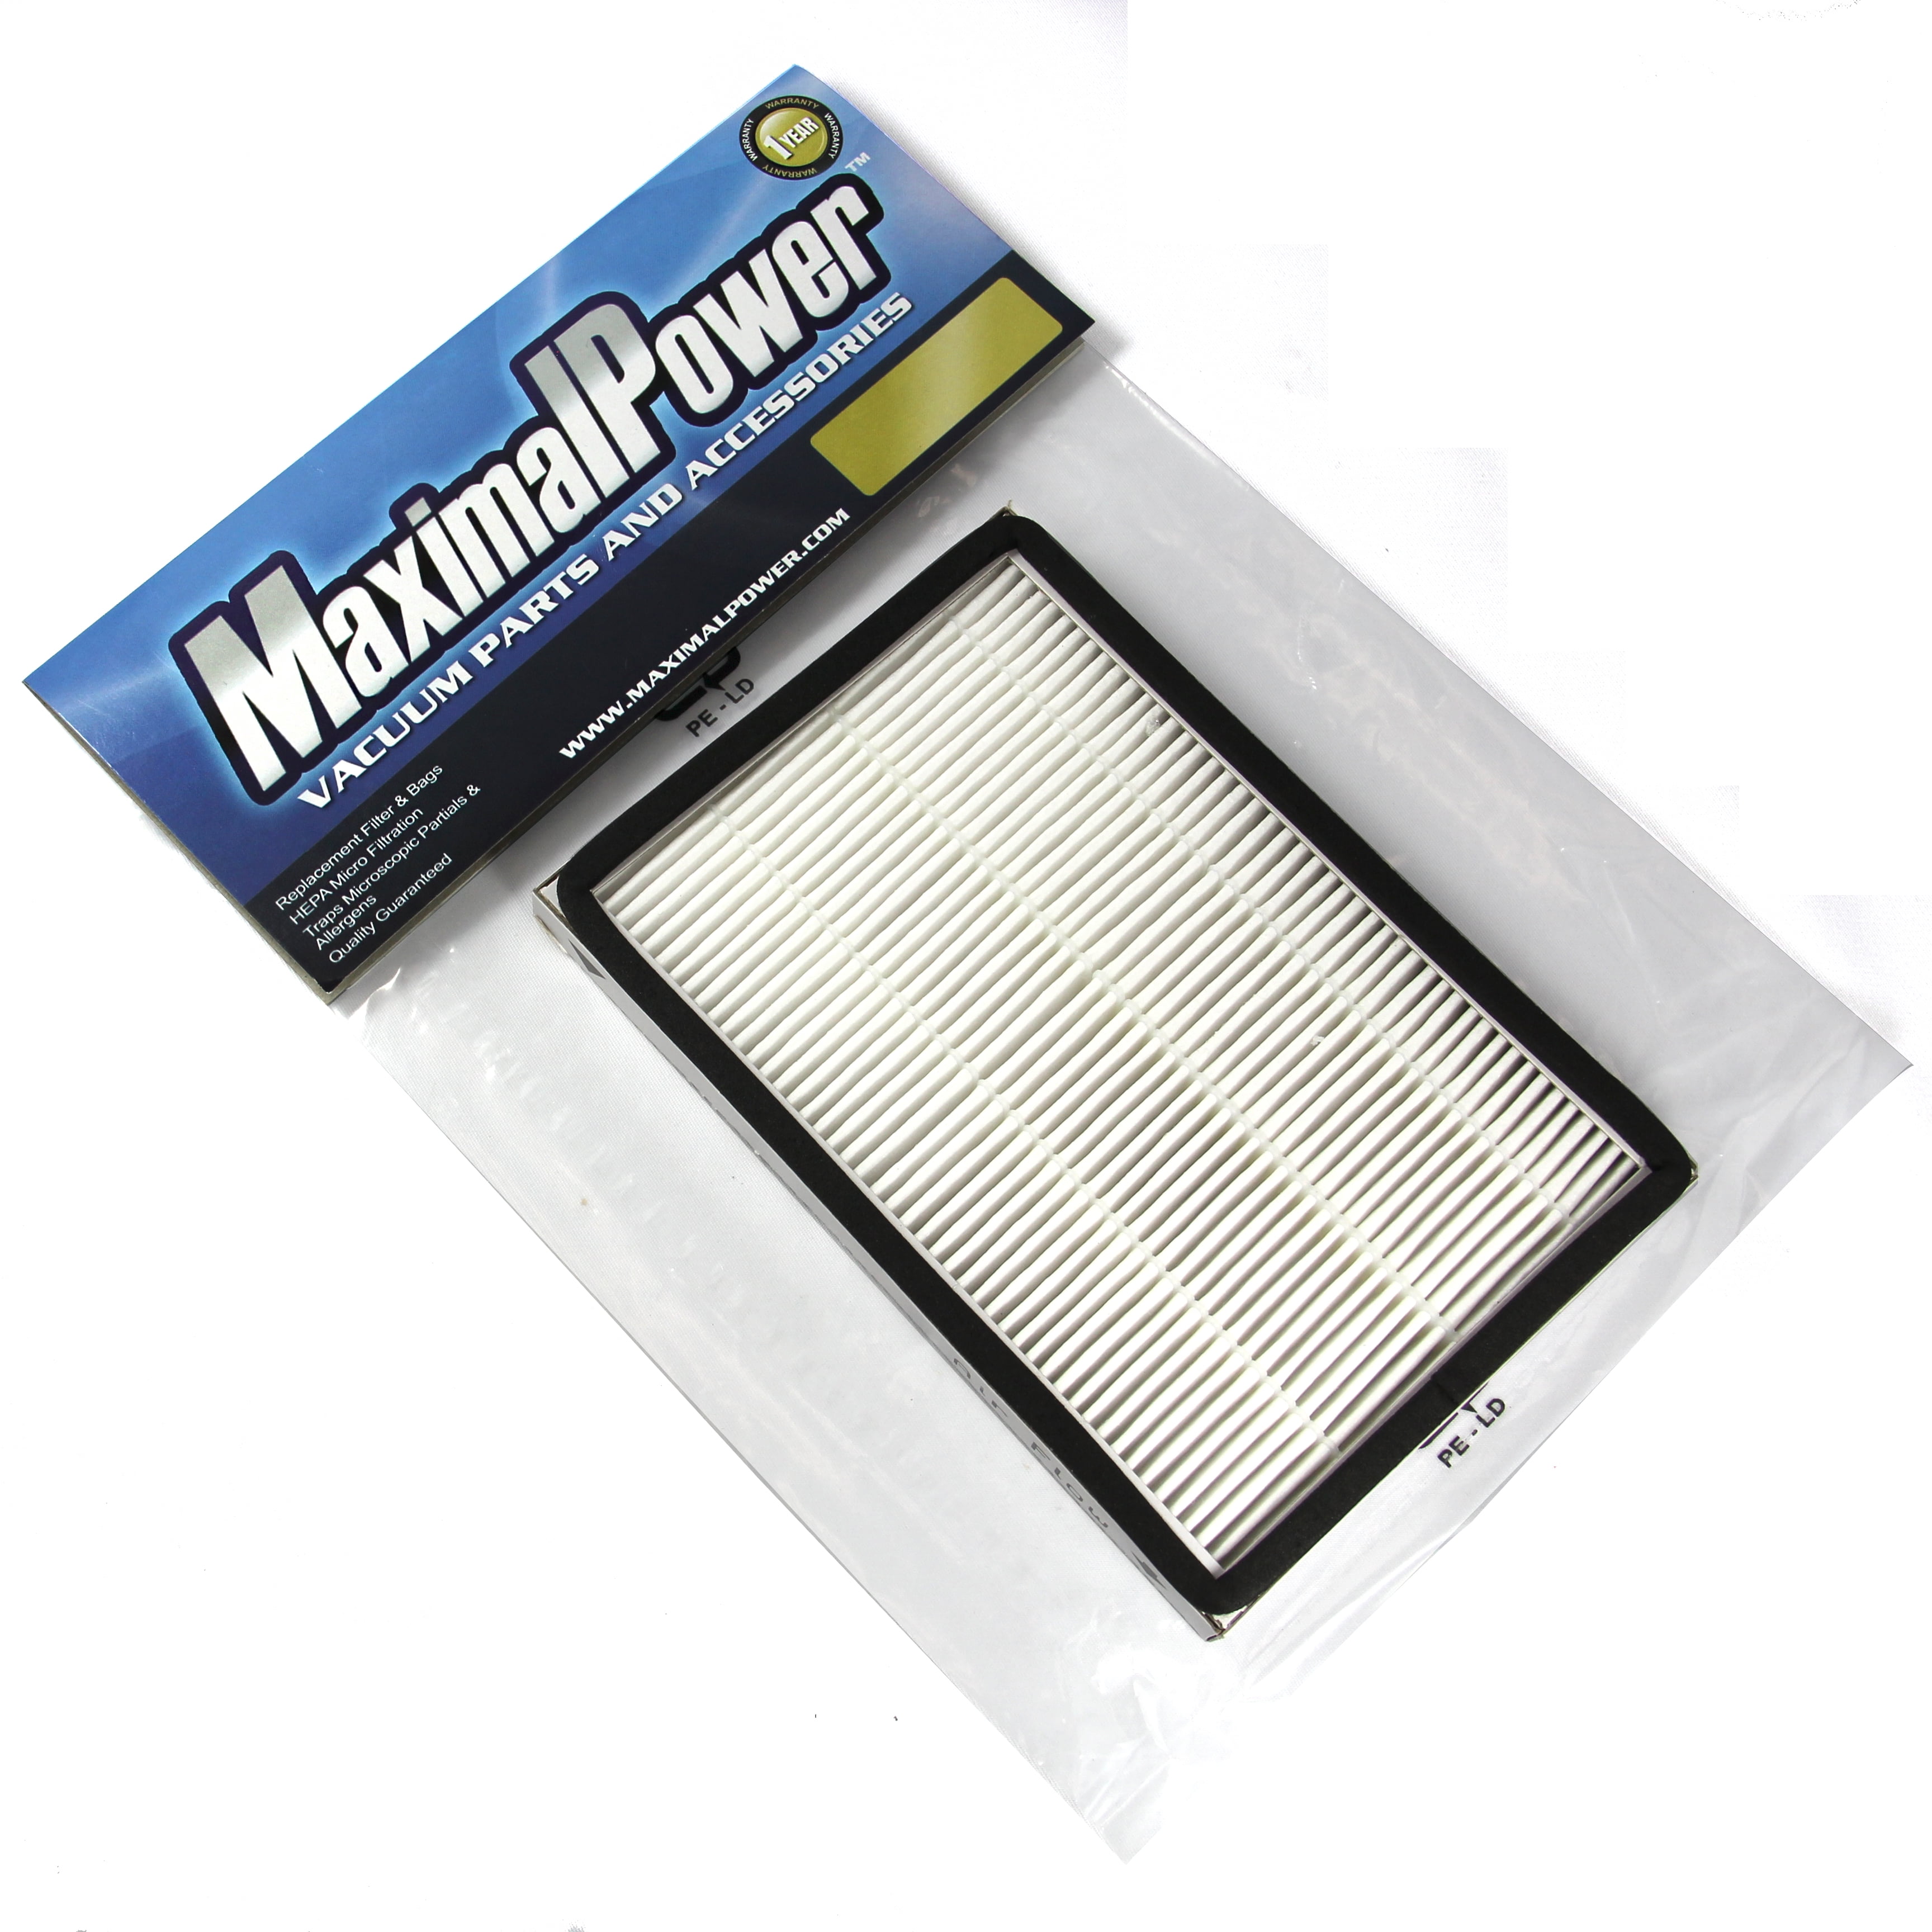 Whispertone and Panasonic Canister Vacuums Includes 6 Micro-Lined Vacuum Filters DVC Replacement 2 Layer Vacuum Filter fits 86883 for Kenmore Progressive Canister